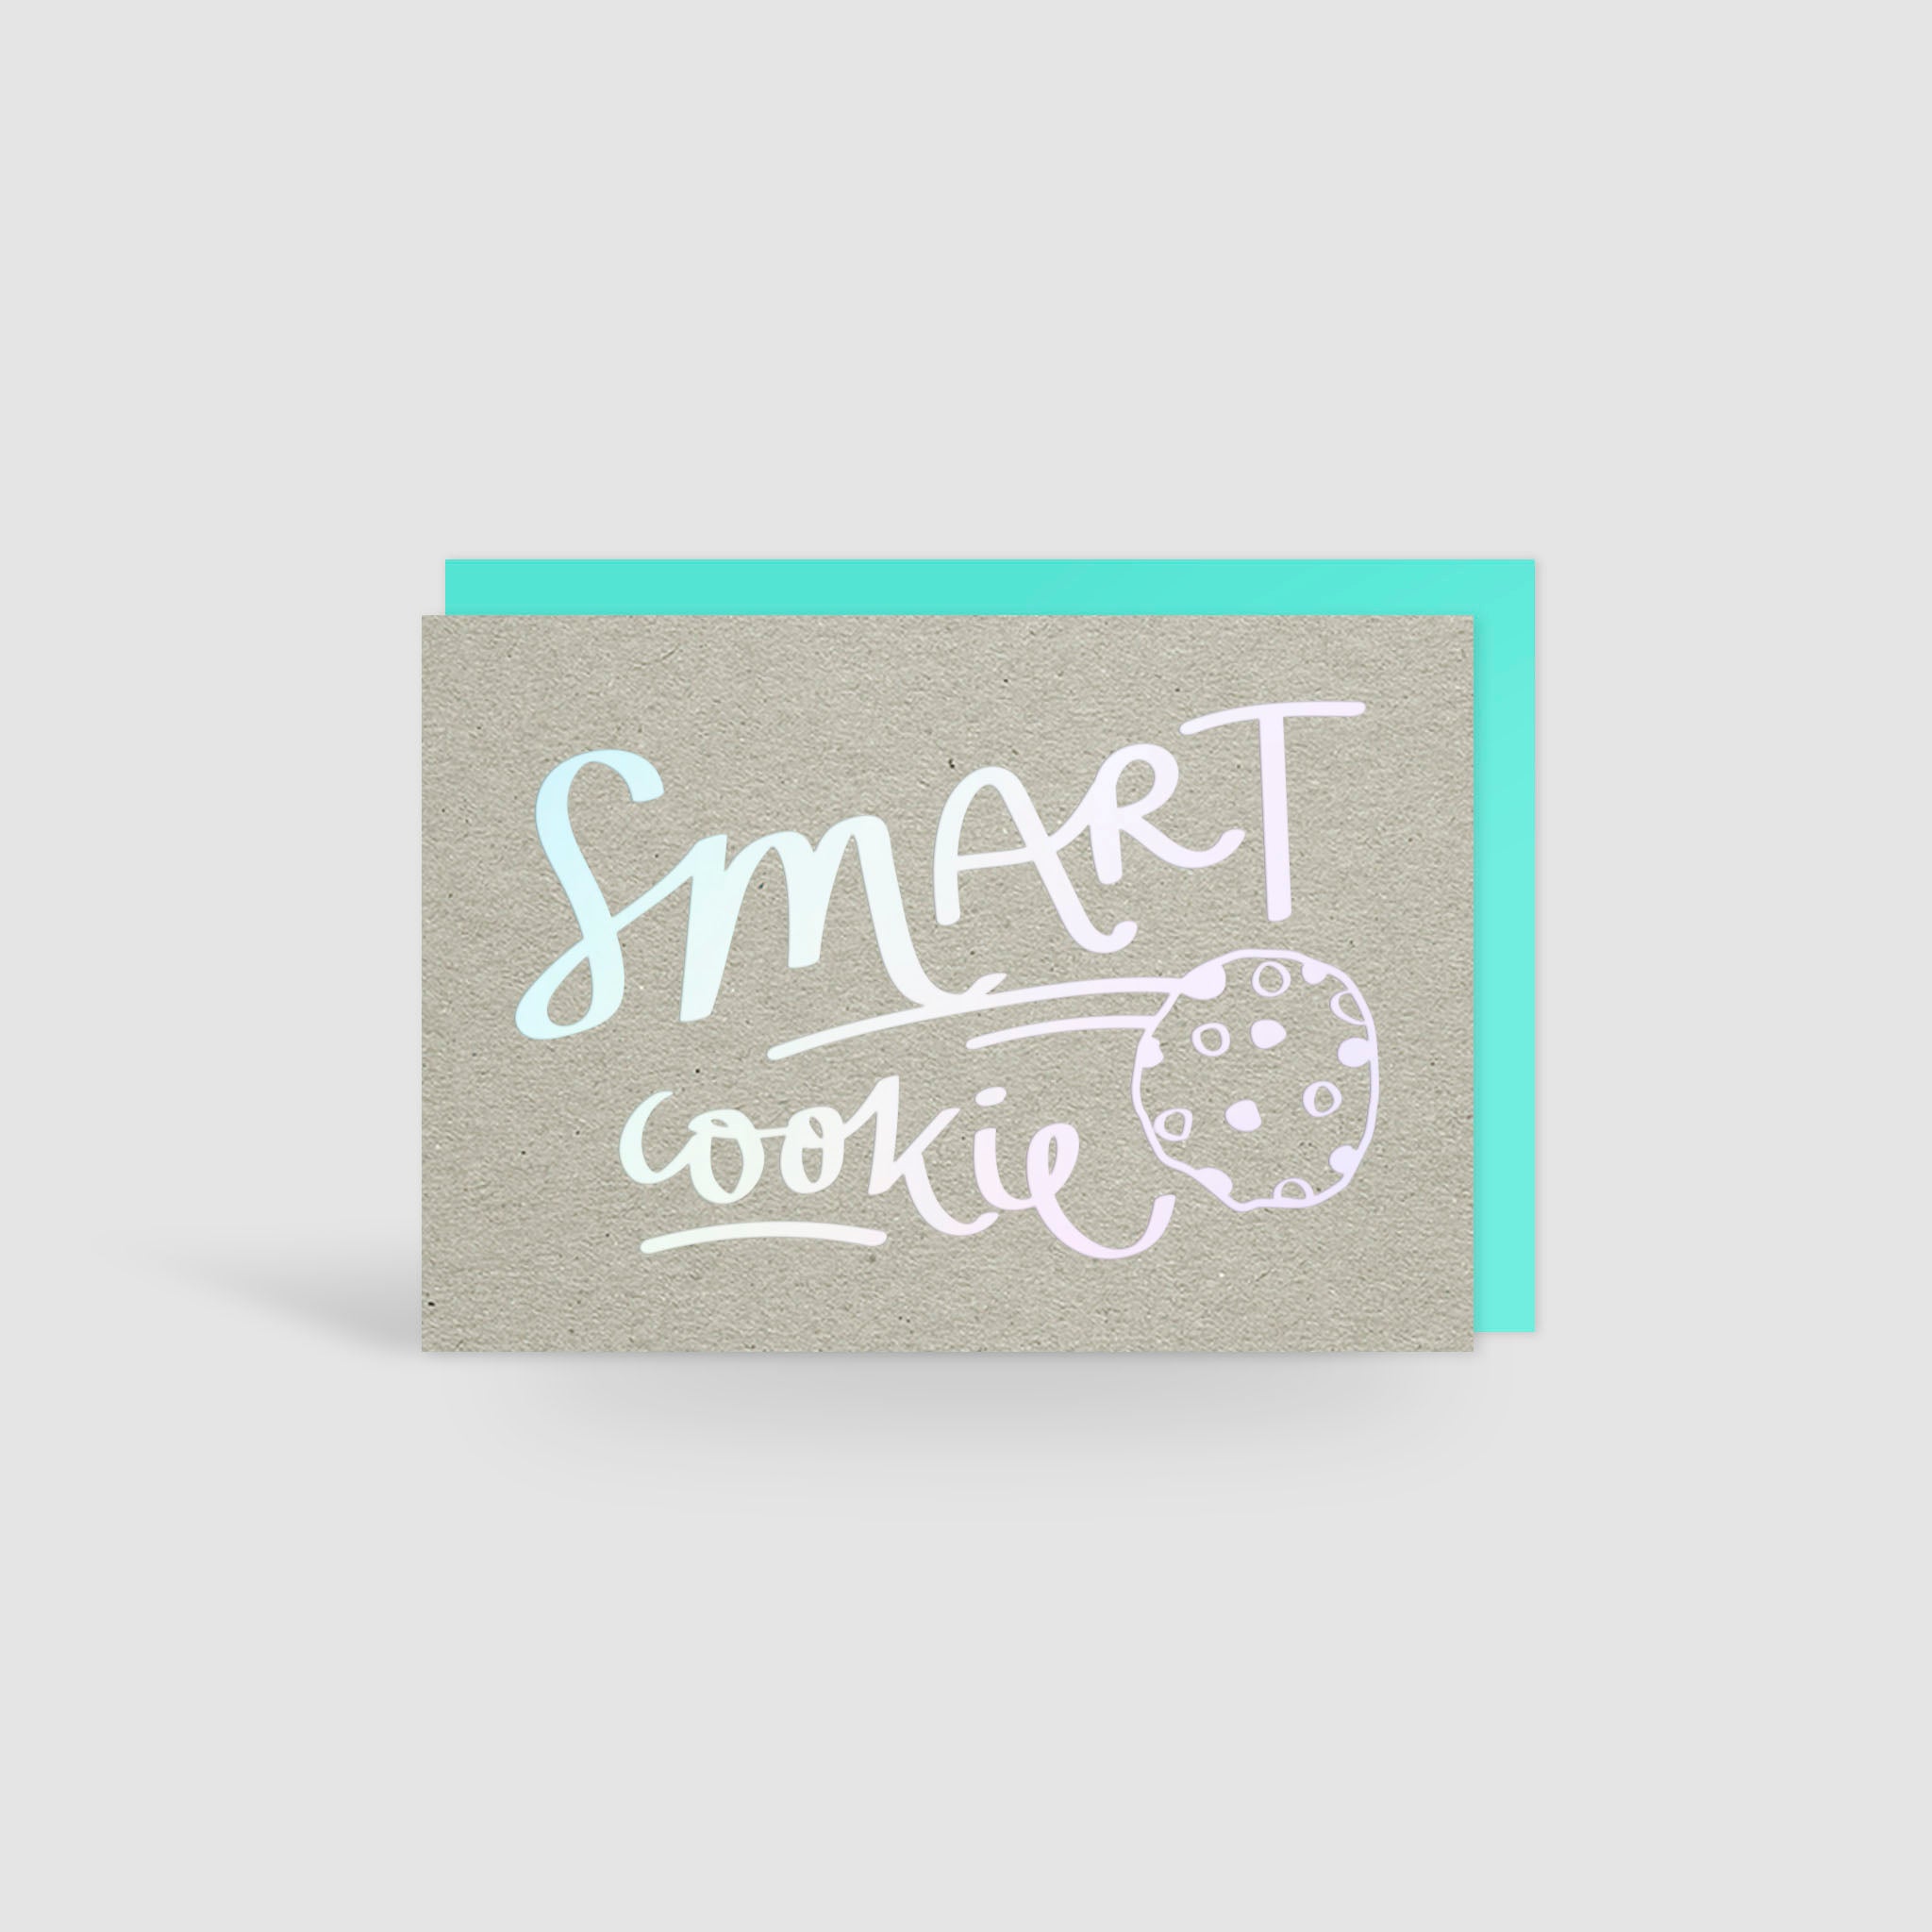 Smart Cookie Holographic Foil Card